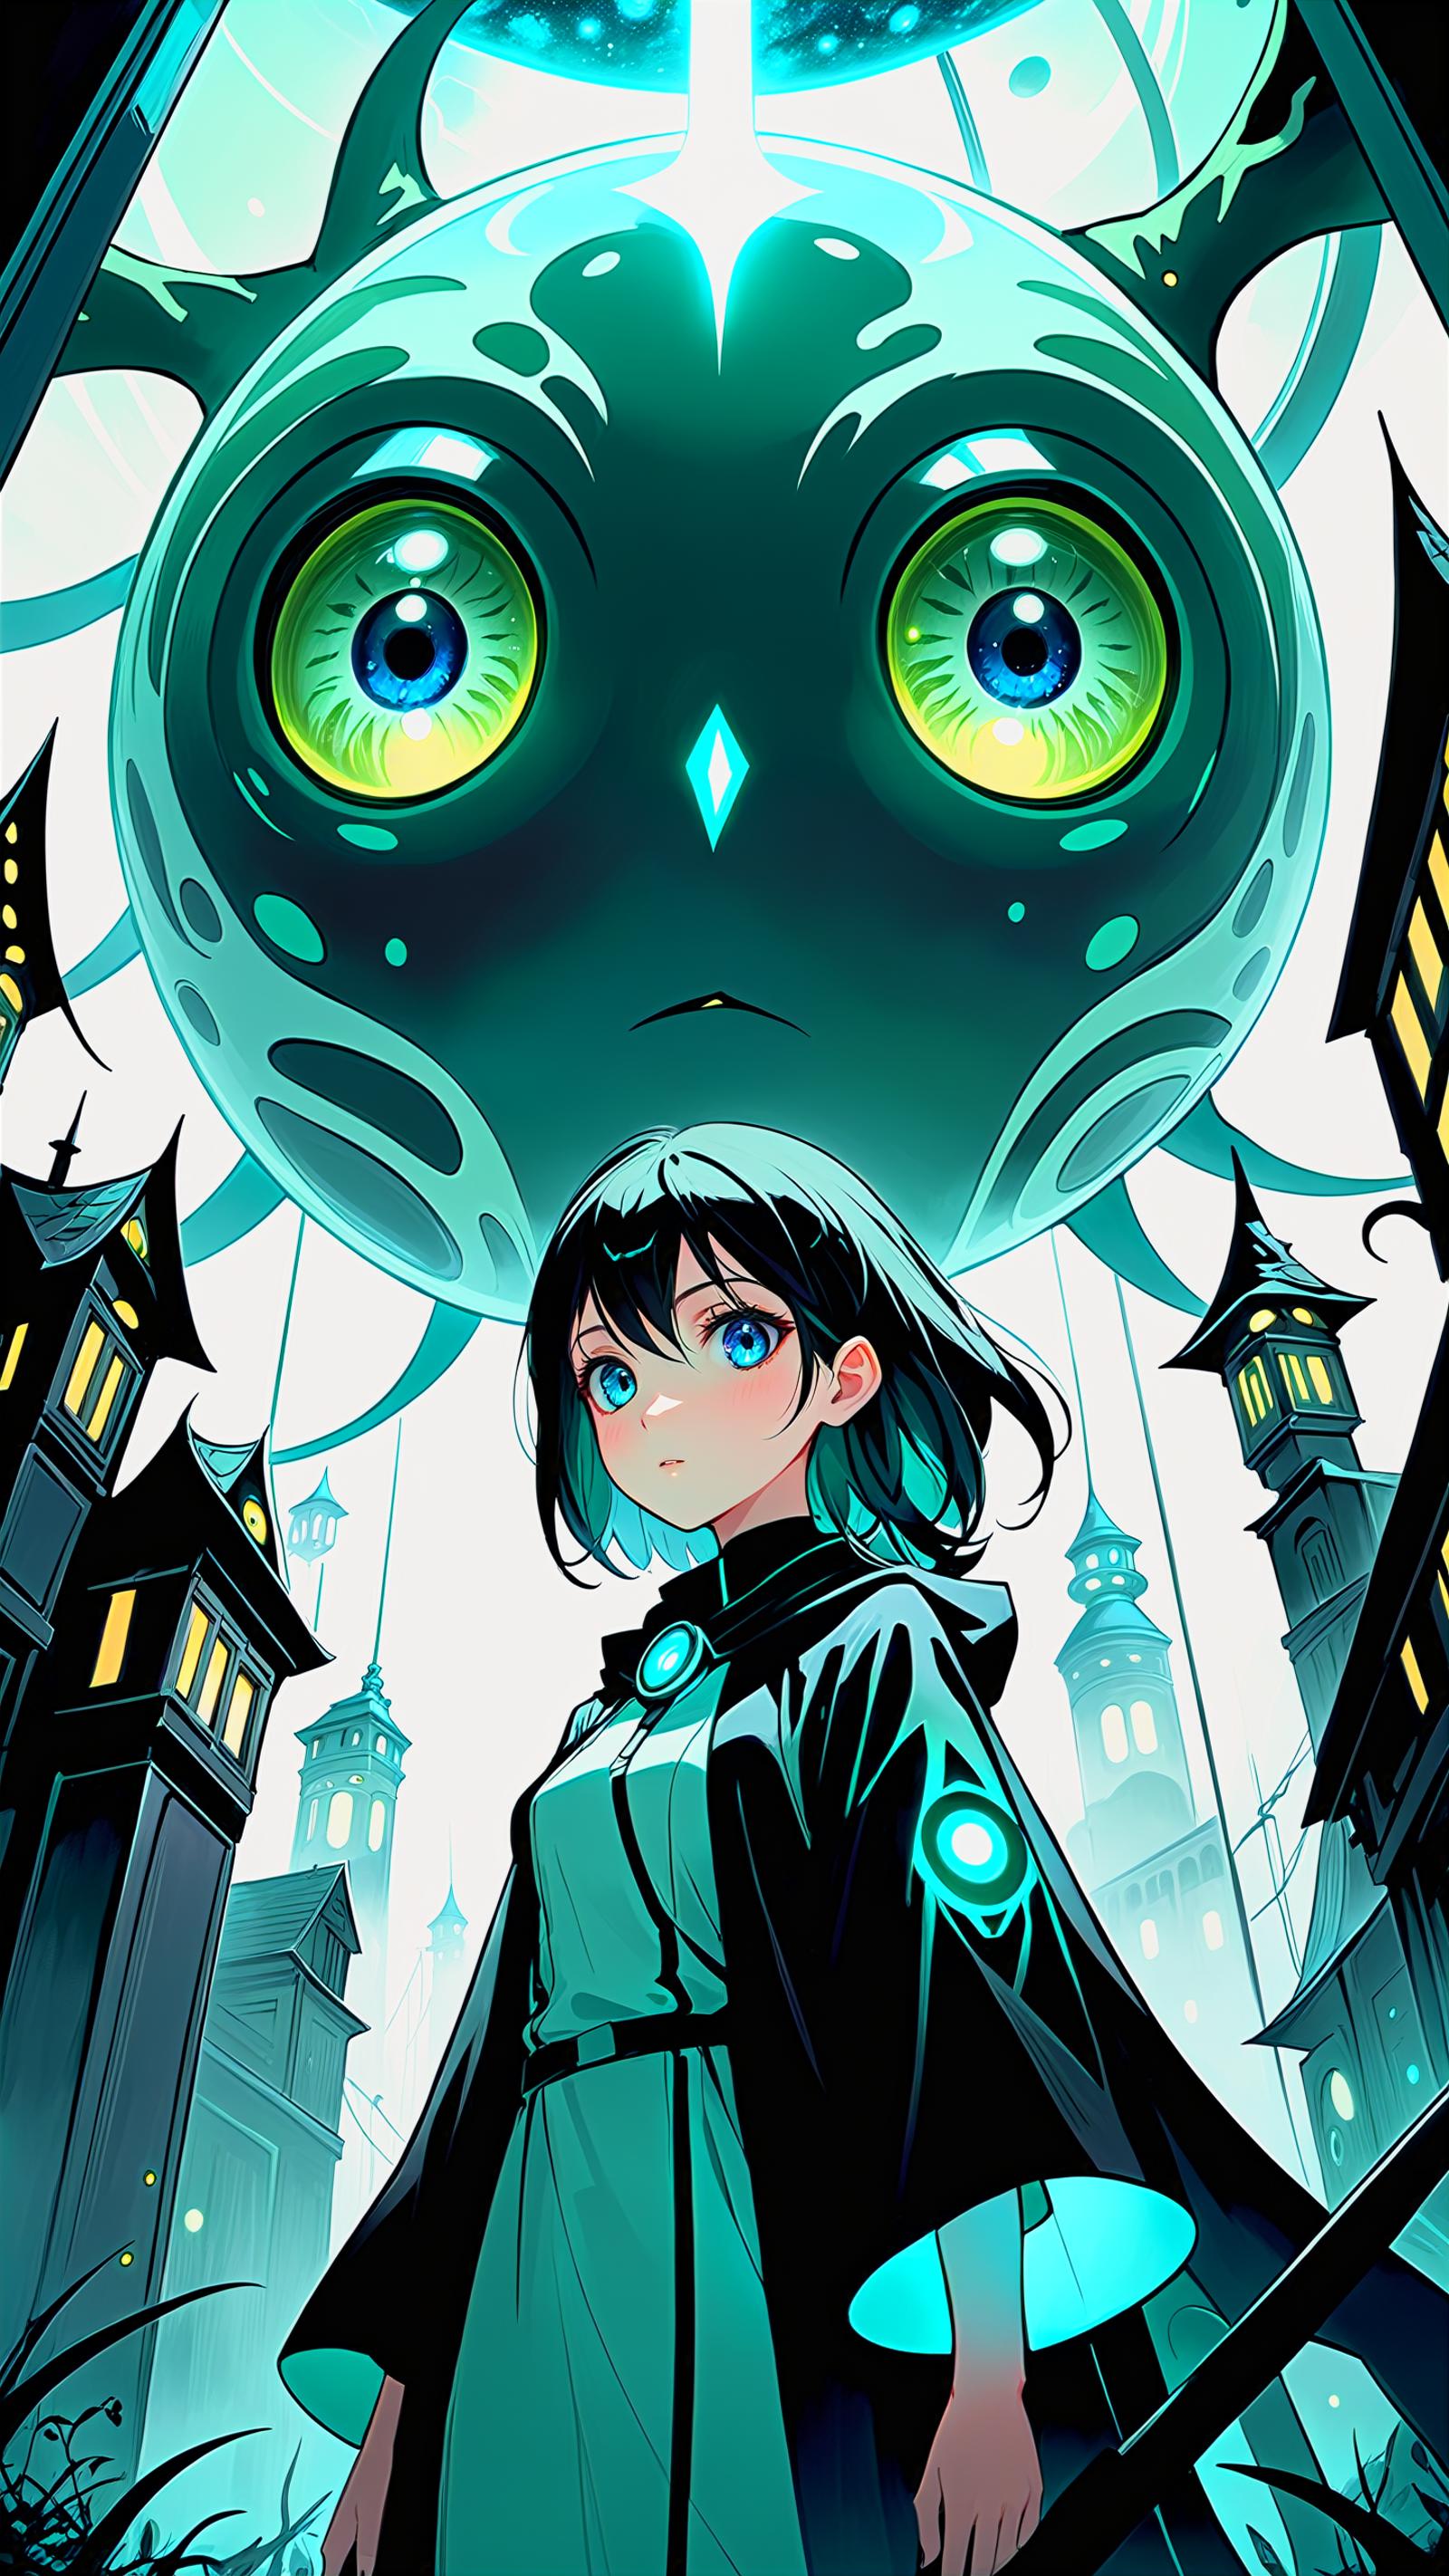 A young girl with blue eyes stares up at a large, floating creature with green eyes.